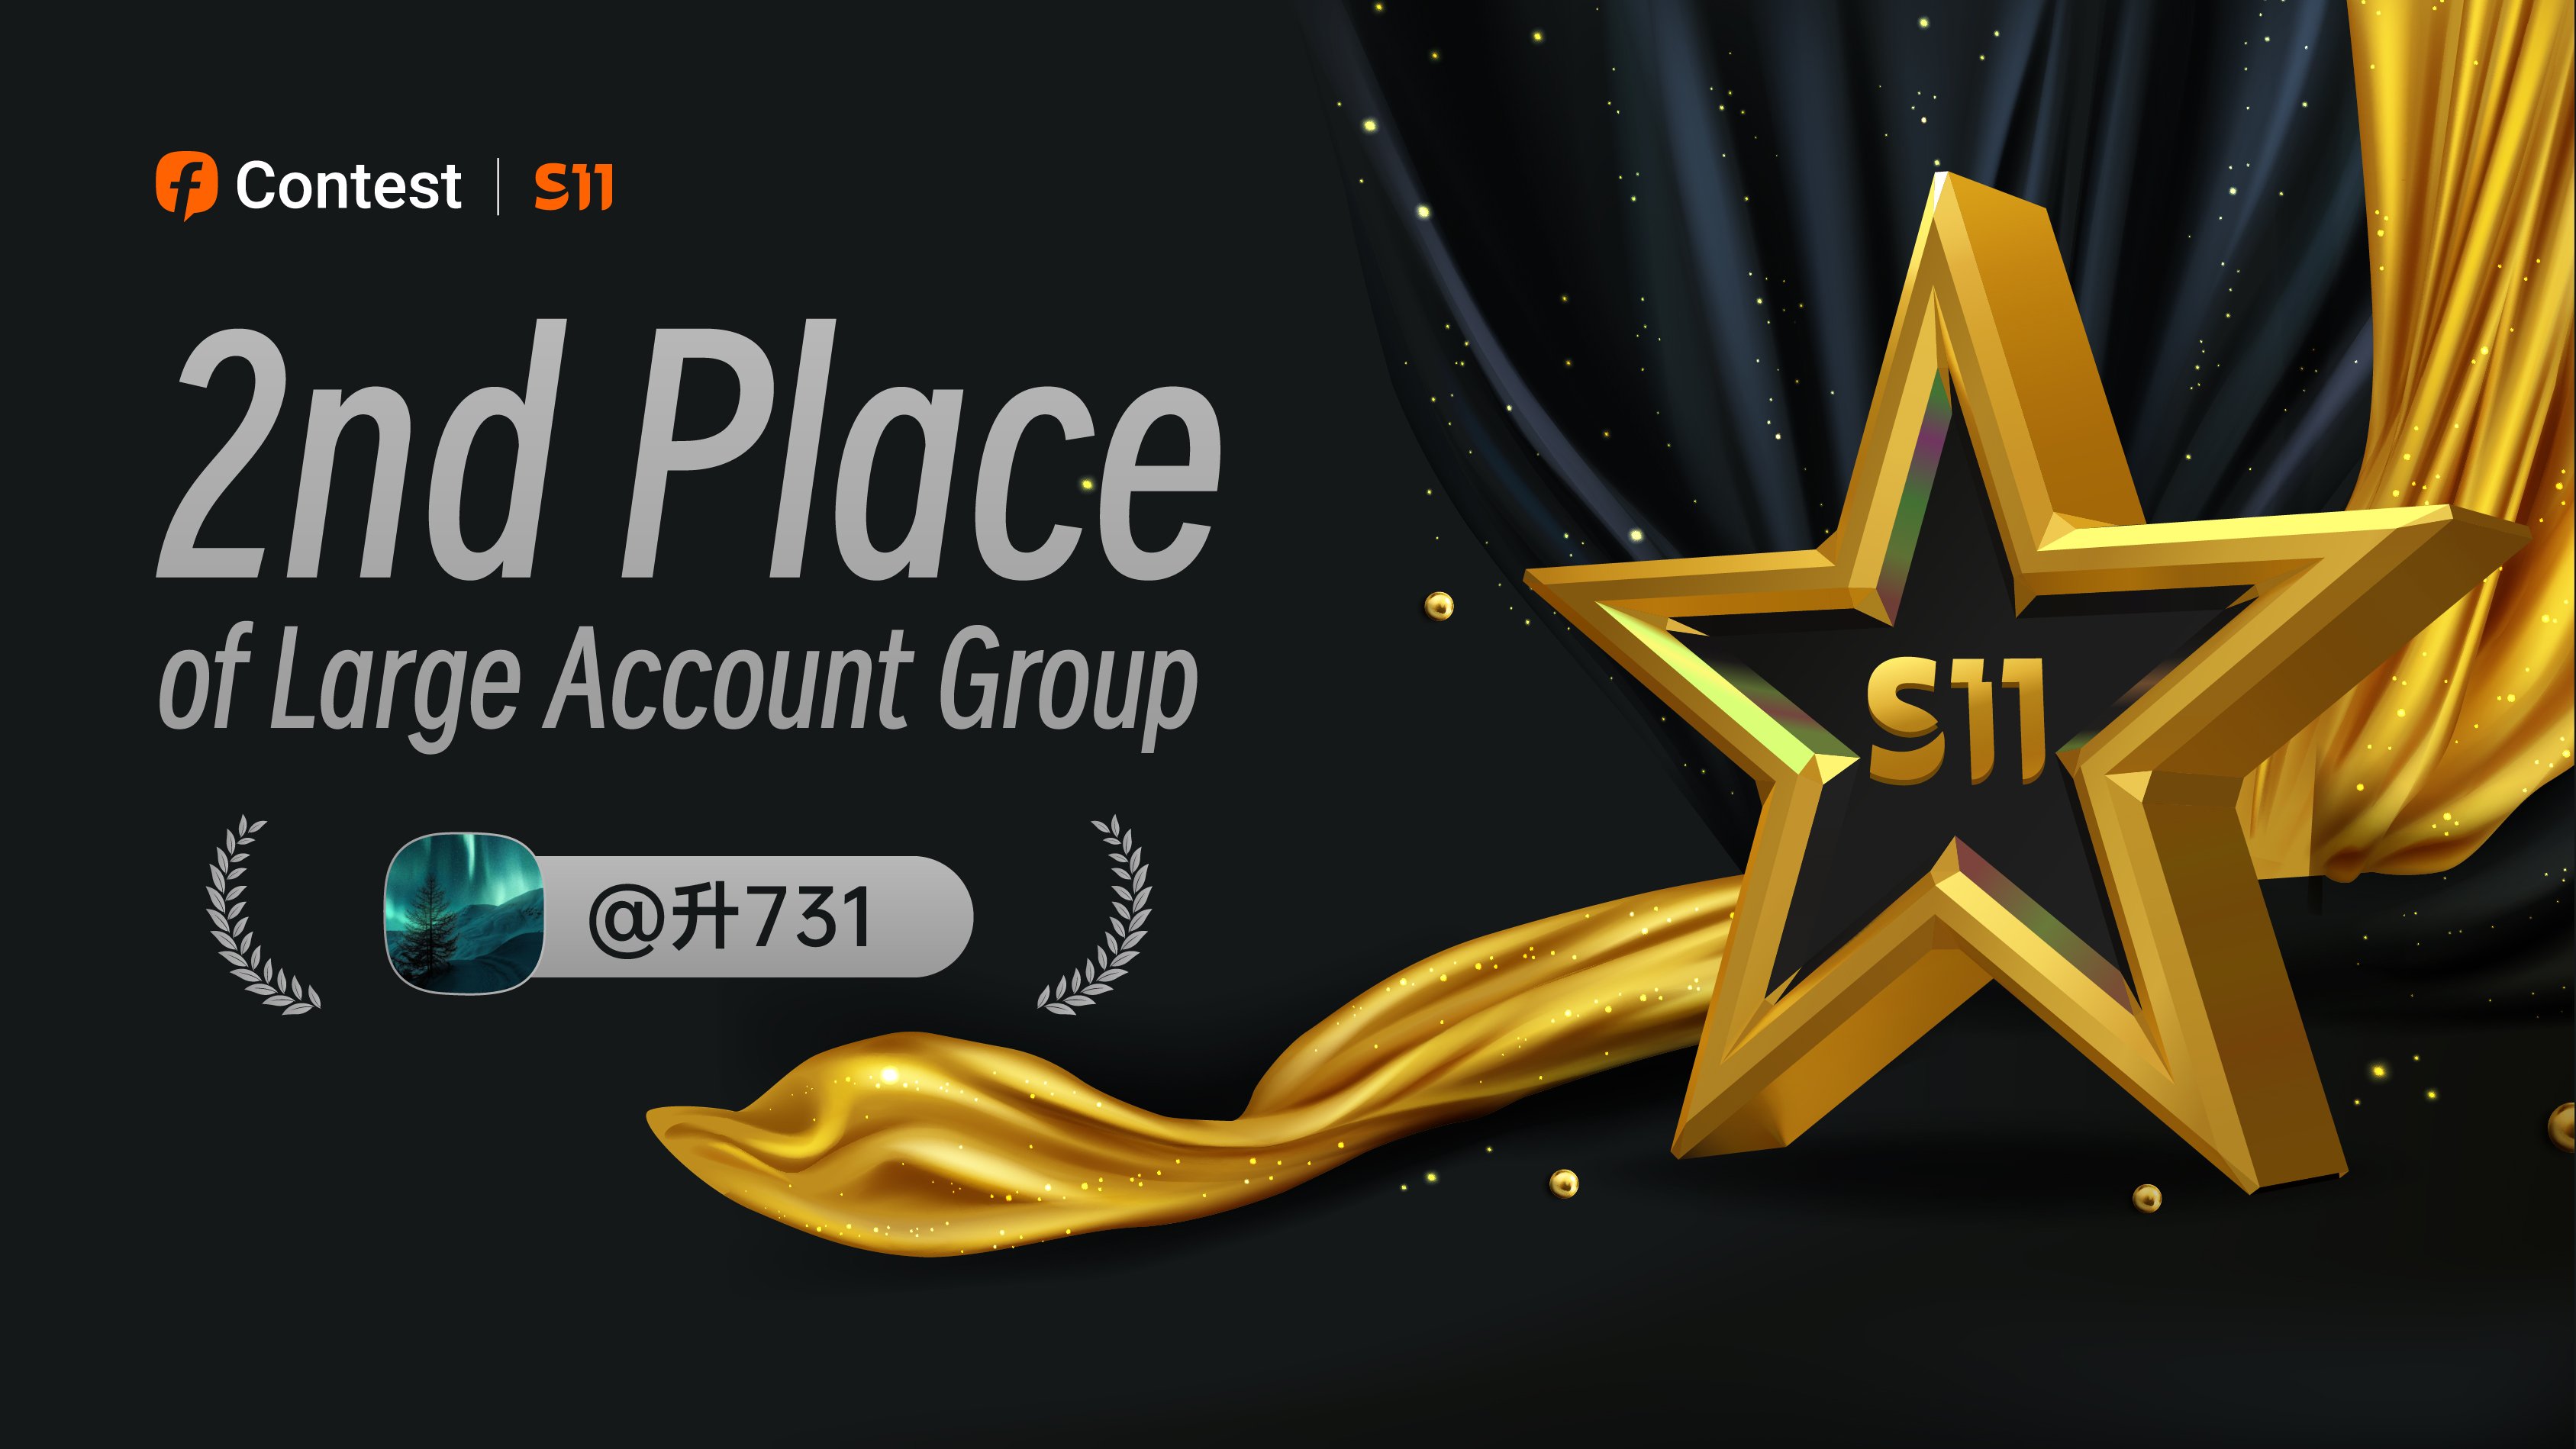 2nd Place of the Large Account Group, @升731